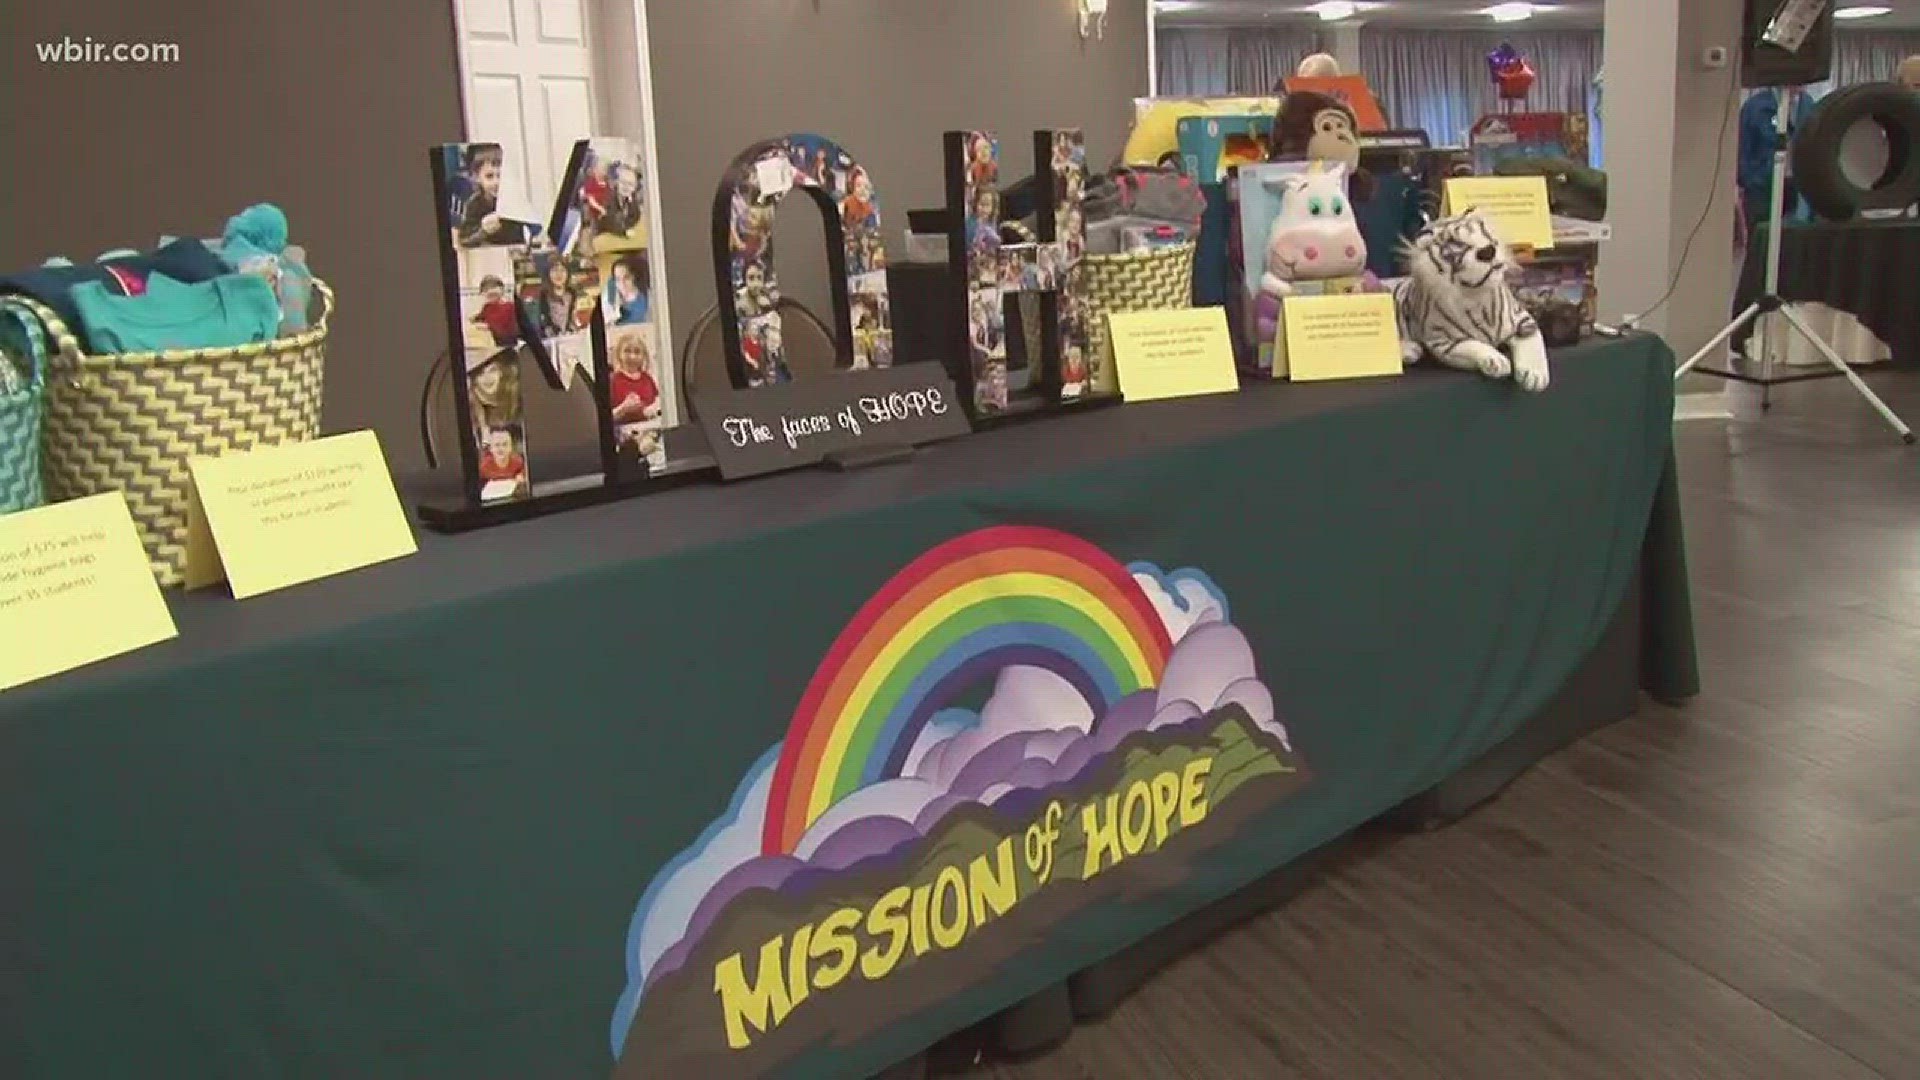 Nov. 2, 2017: The Mission of Hope kicked off its winter fundraising drive for the Christmas season.